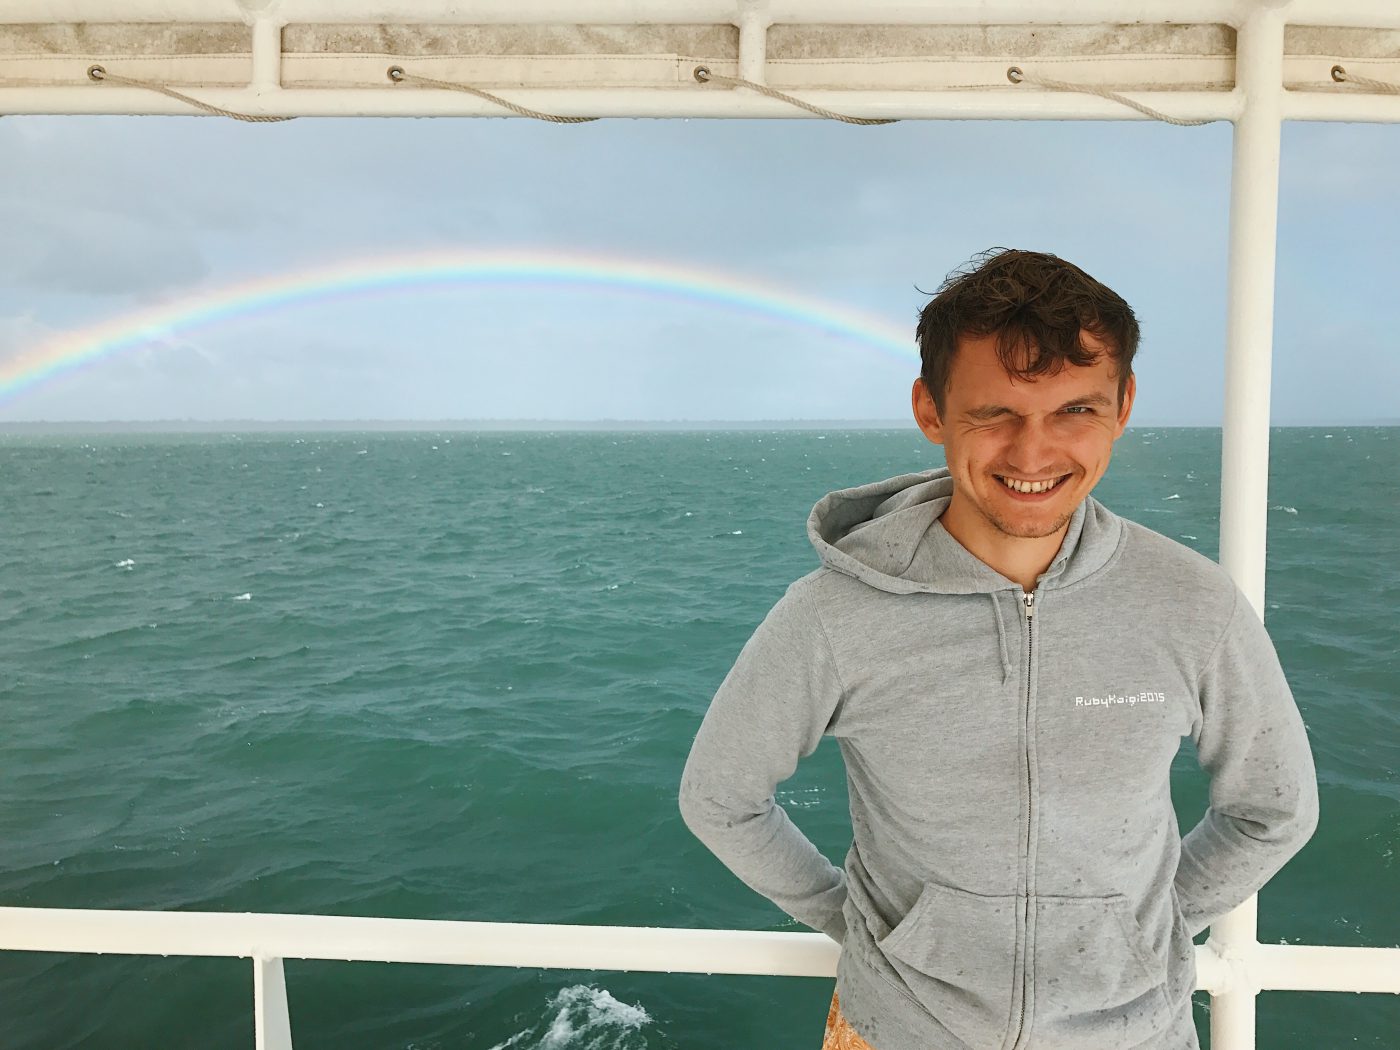  We spotted a rainbow on the ferry